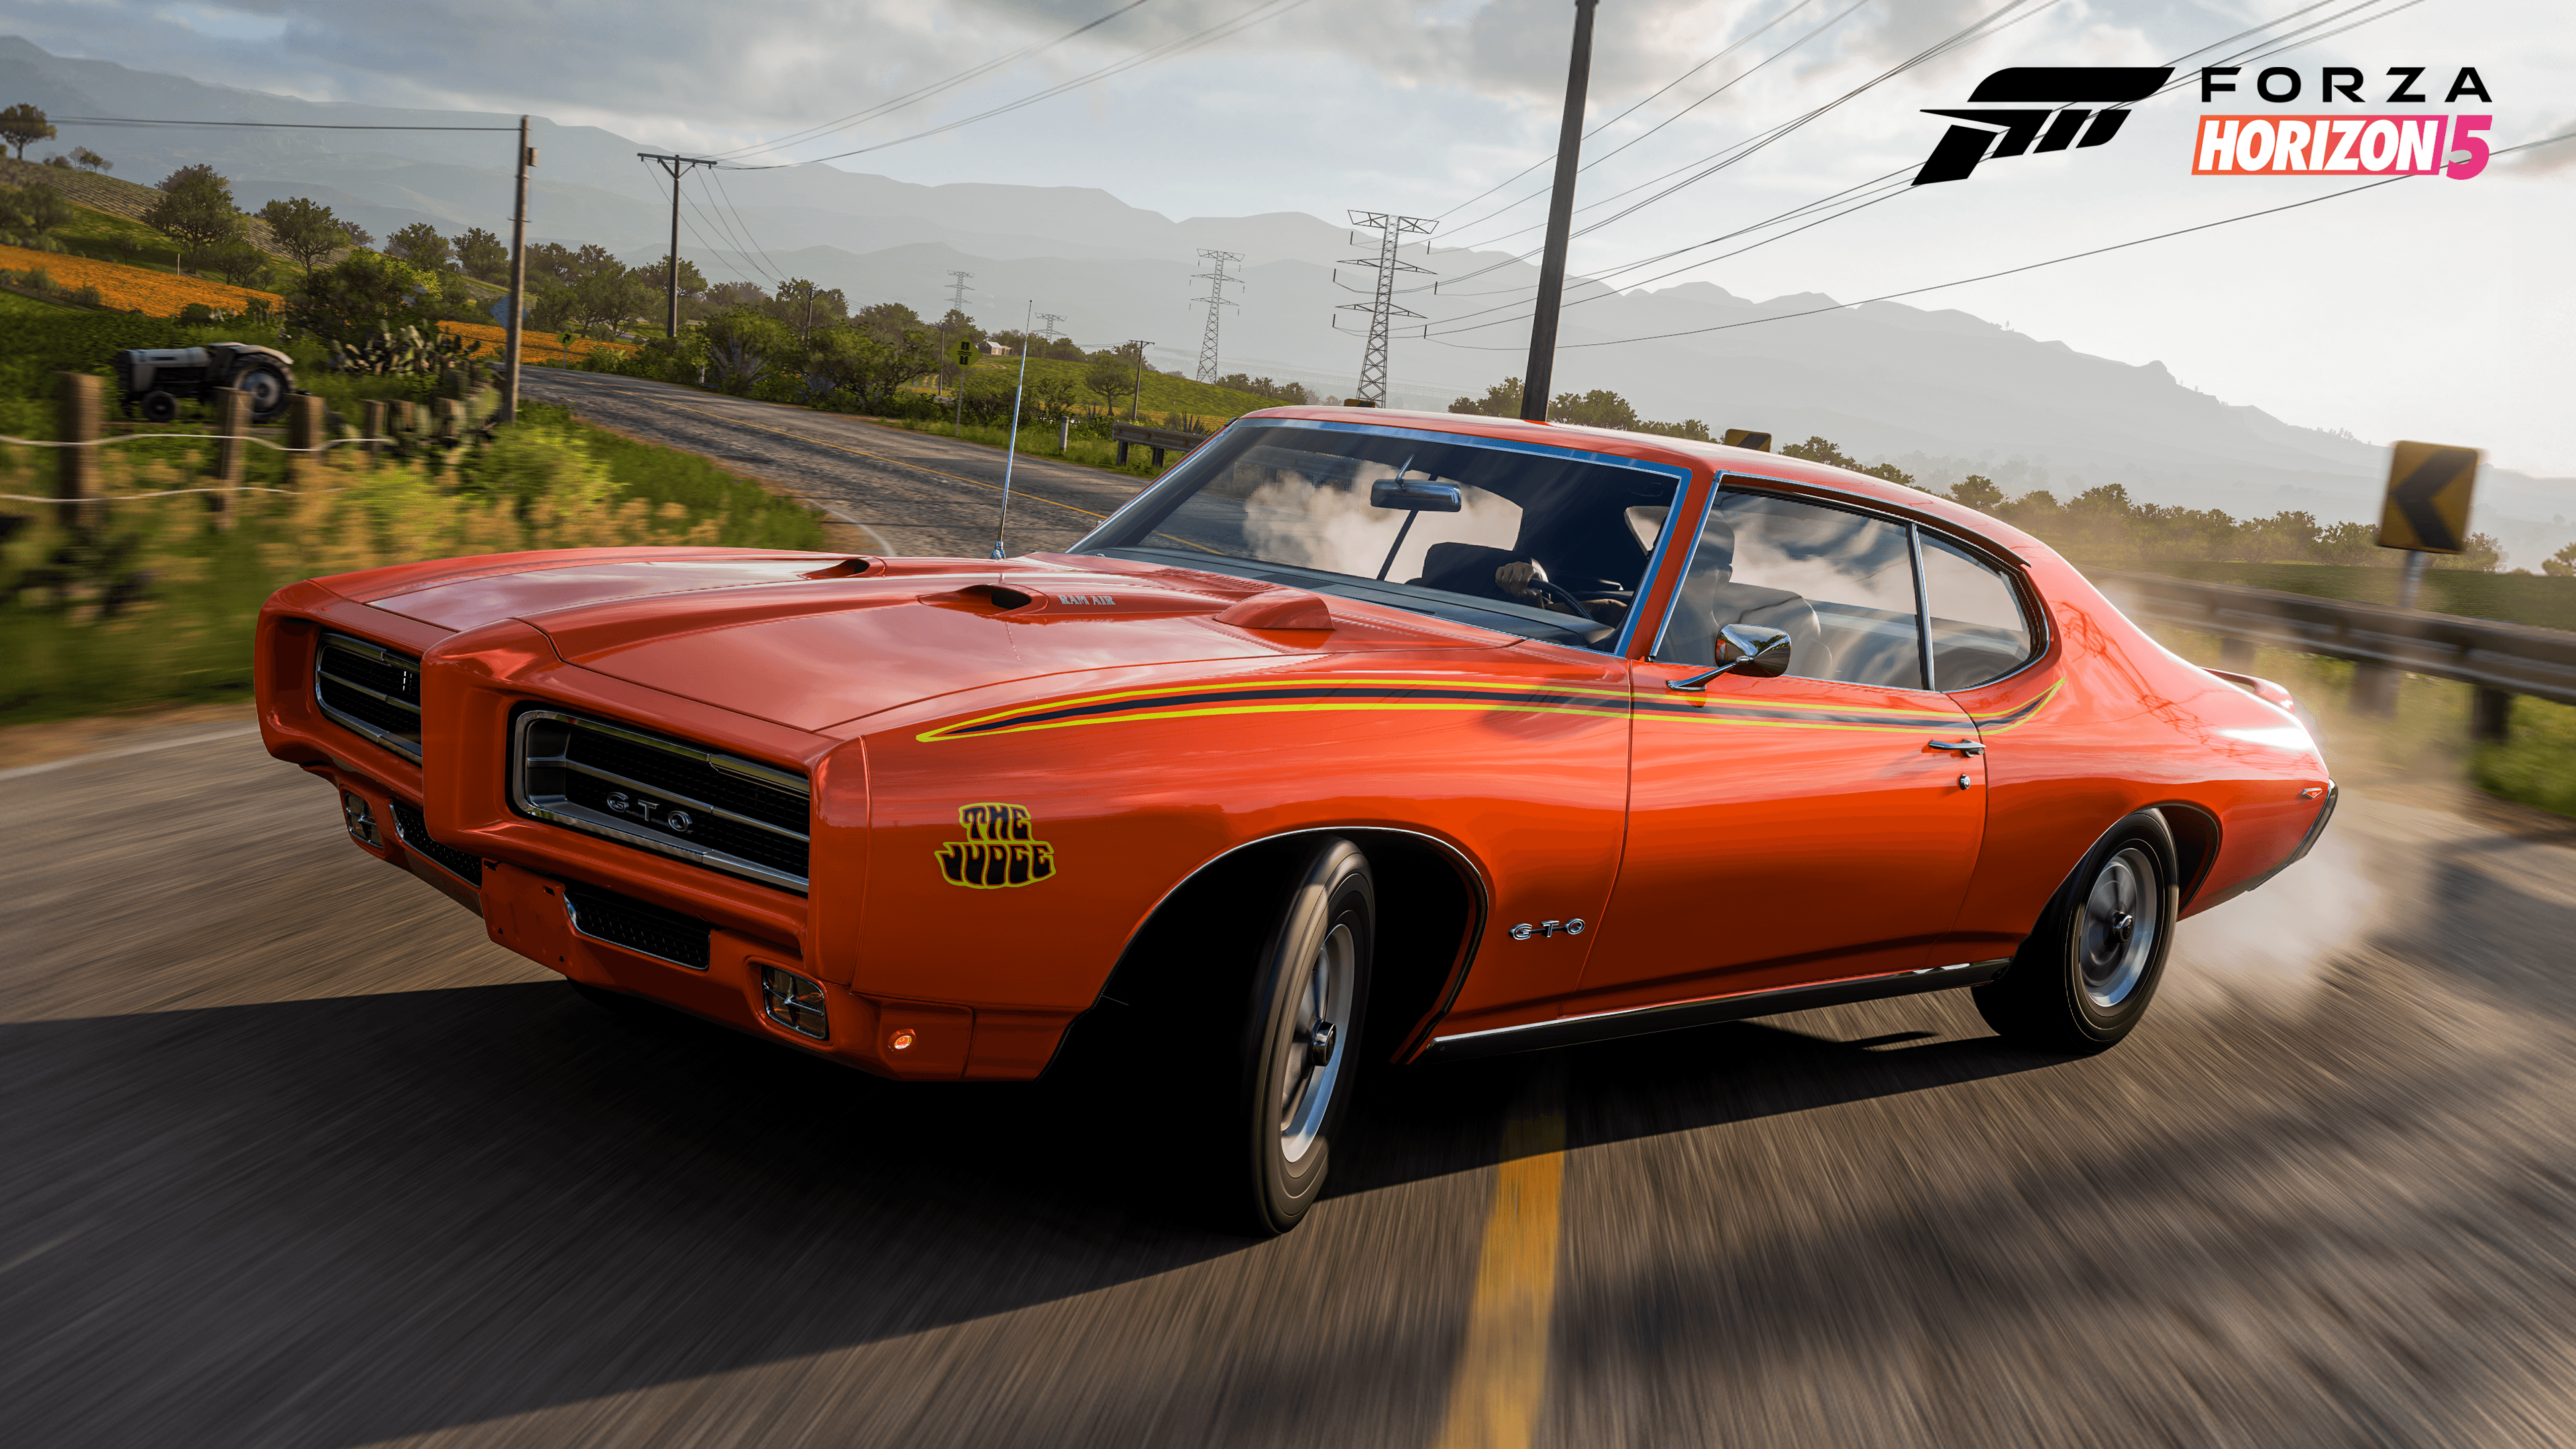 Forza Horizon 5 American Automotive Car Pack and New Patch Available